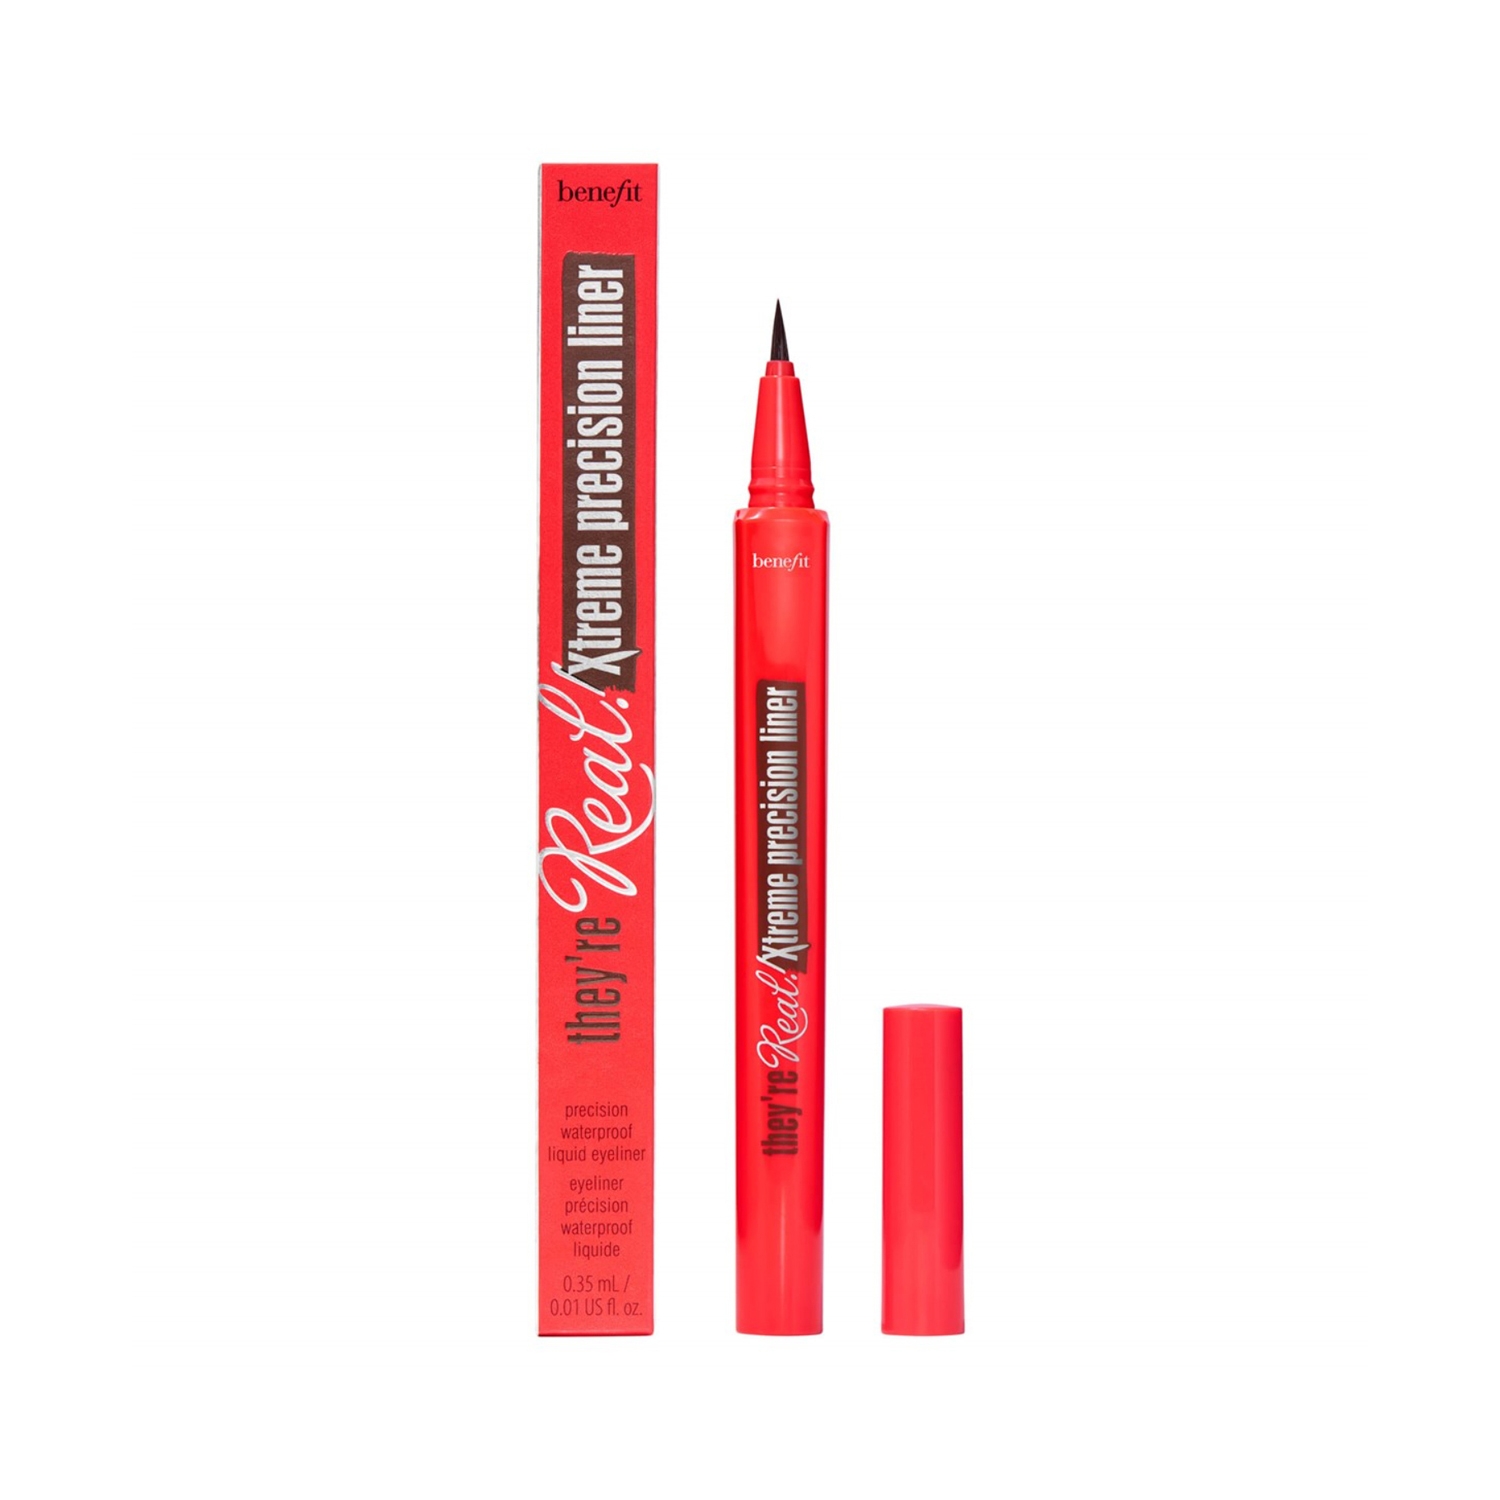 Benefit Cosmetics | Benefit Cosmetics They're Real! Xtreme Precision Eyeliner - Brown (0.35ml)